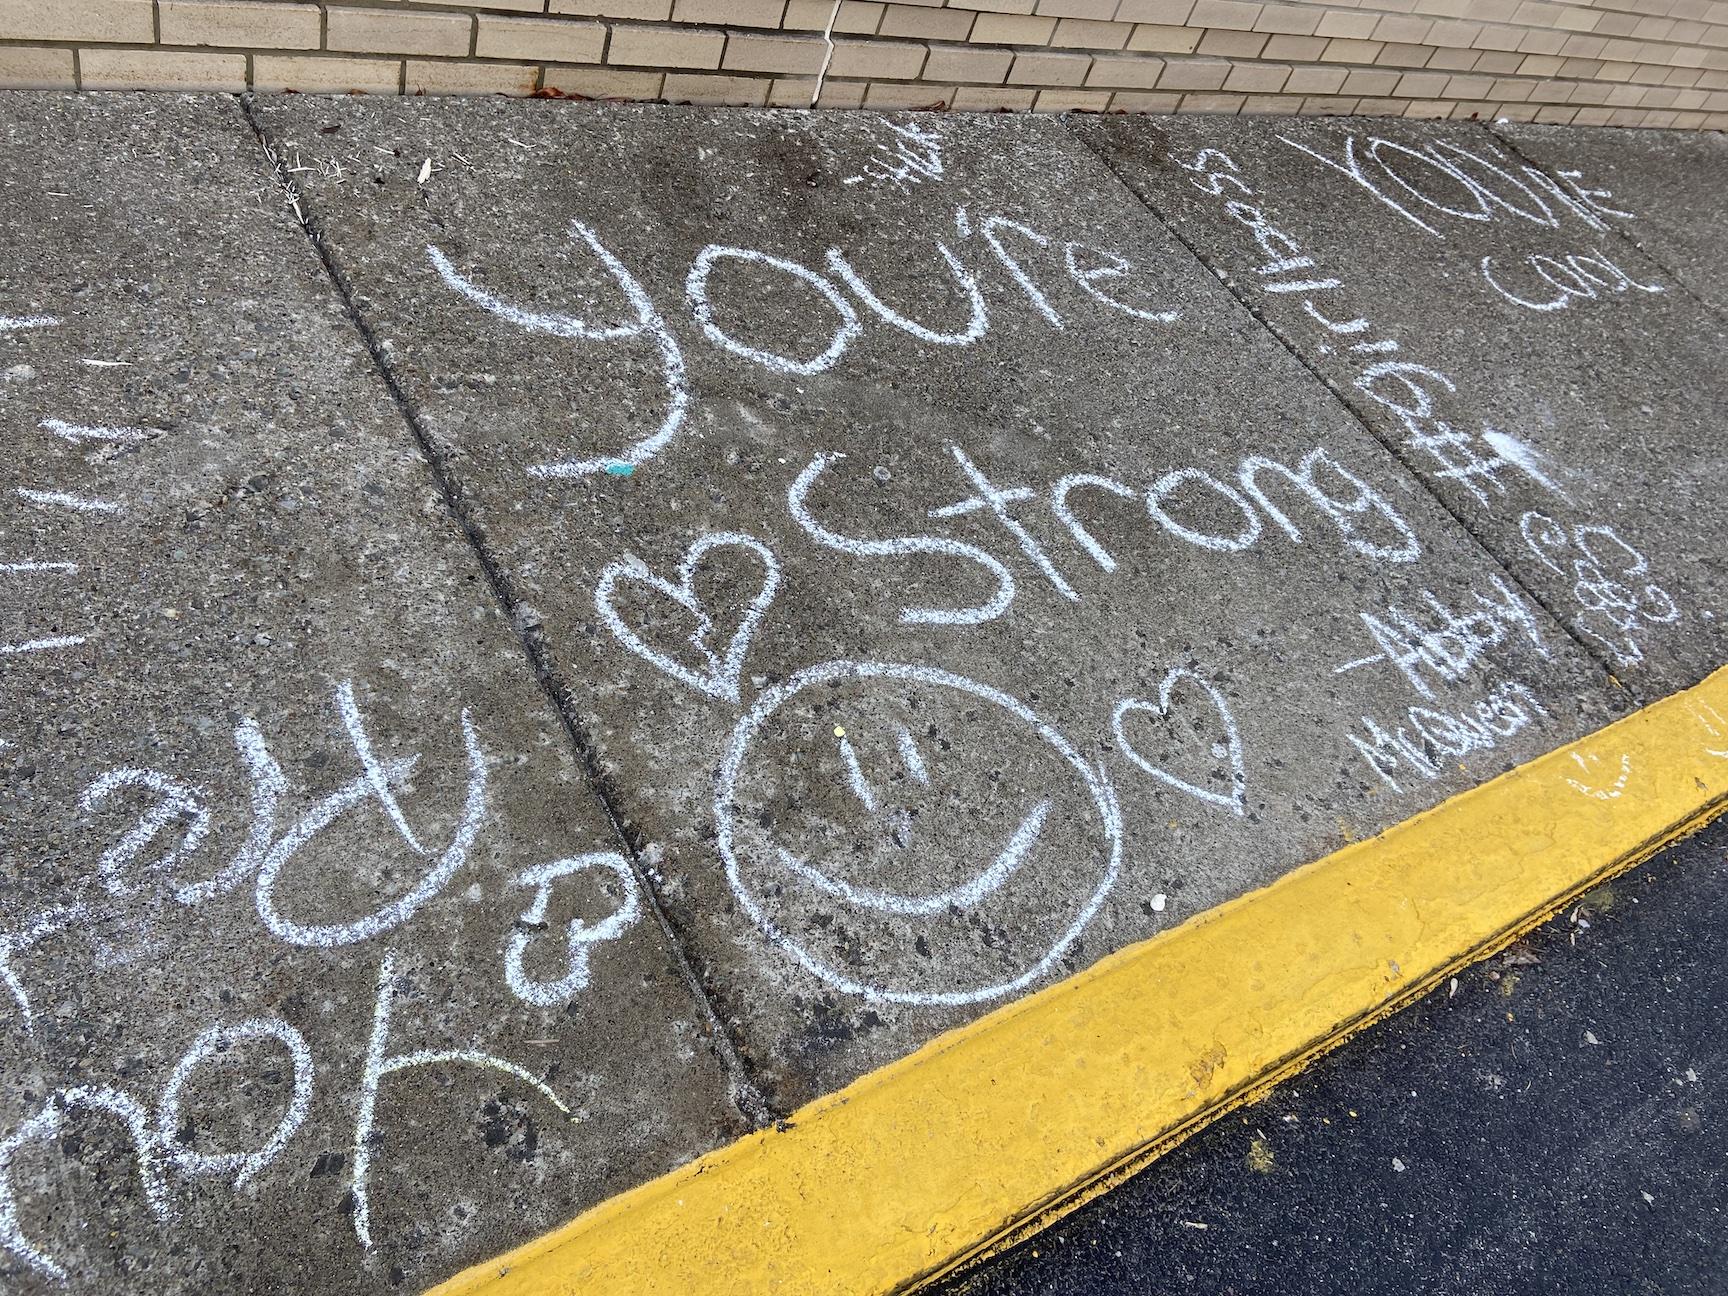 Students decorated the sidewalks with encouraging messages